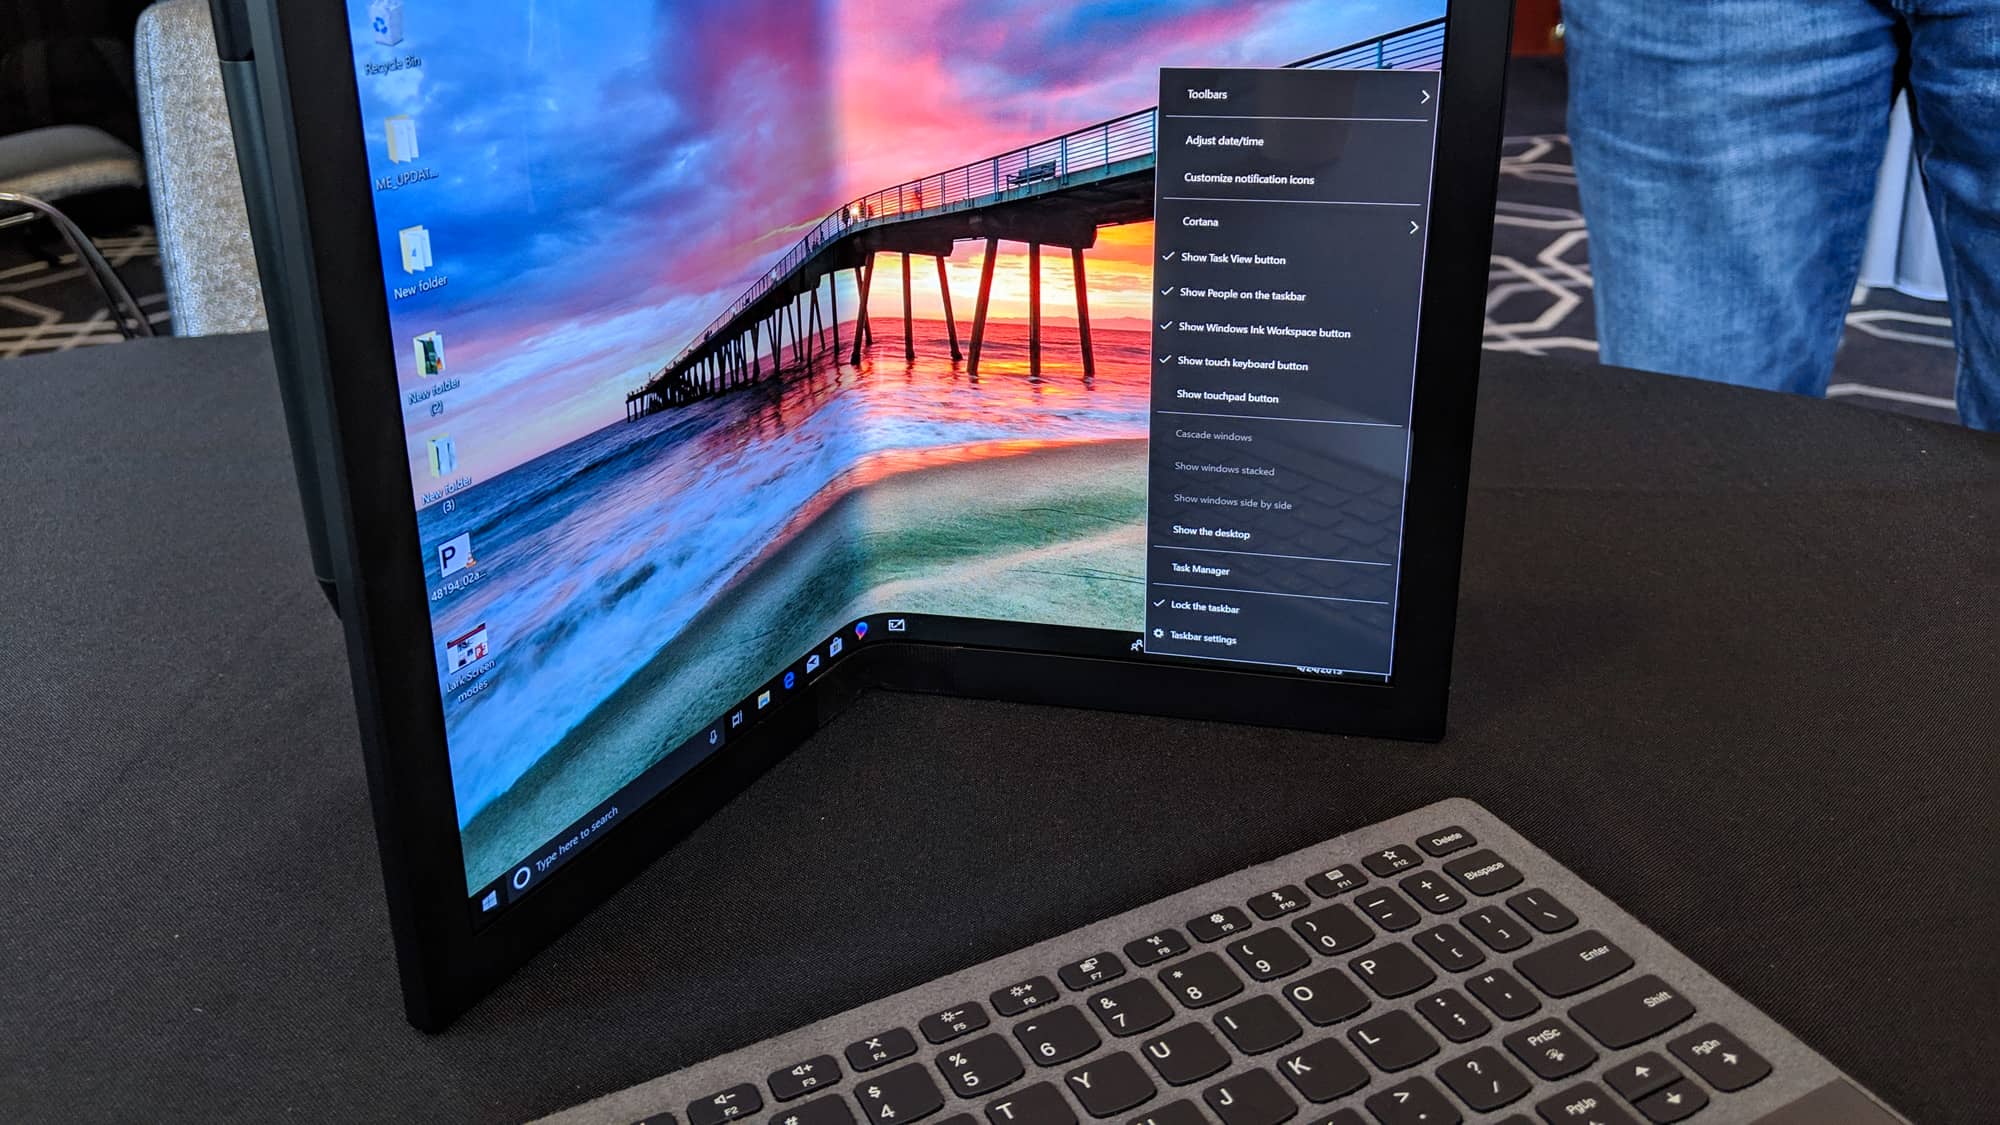 Lenovo Has Shown Off The World’s Foldable PC At Accelerate Event